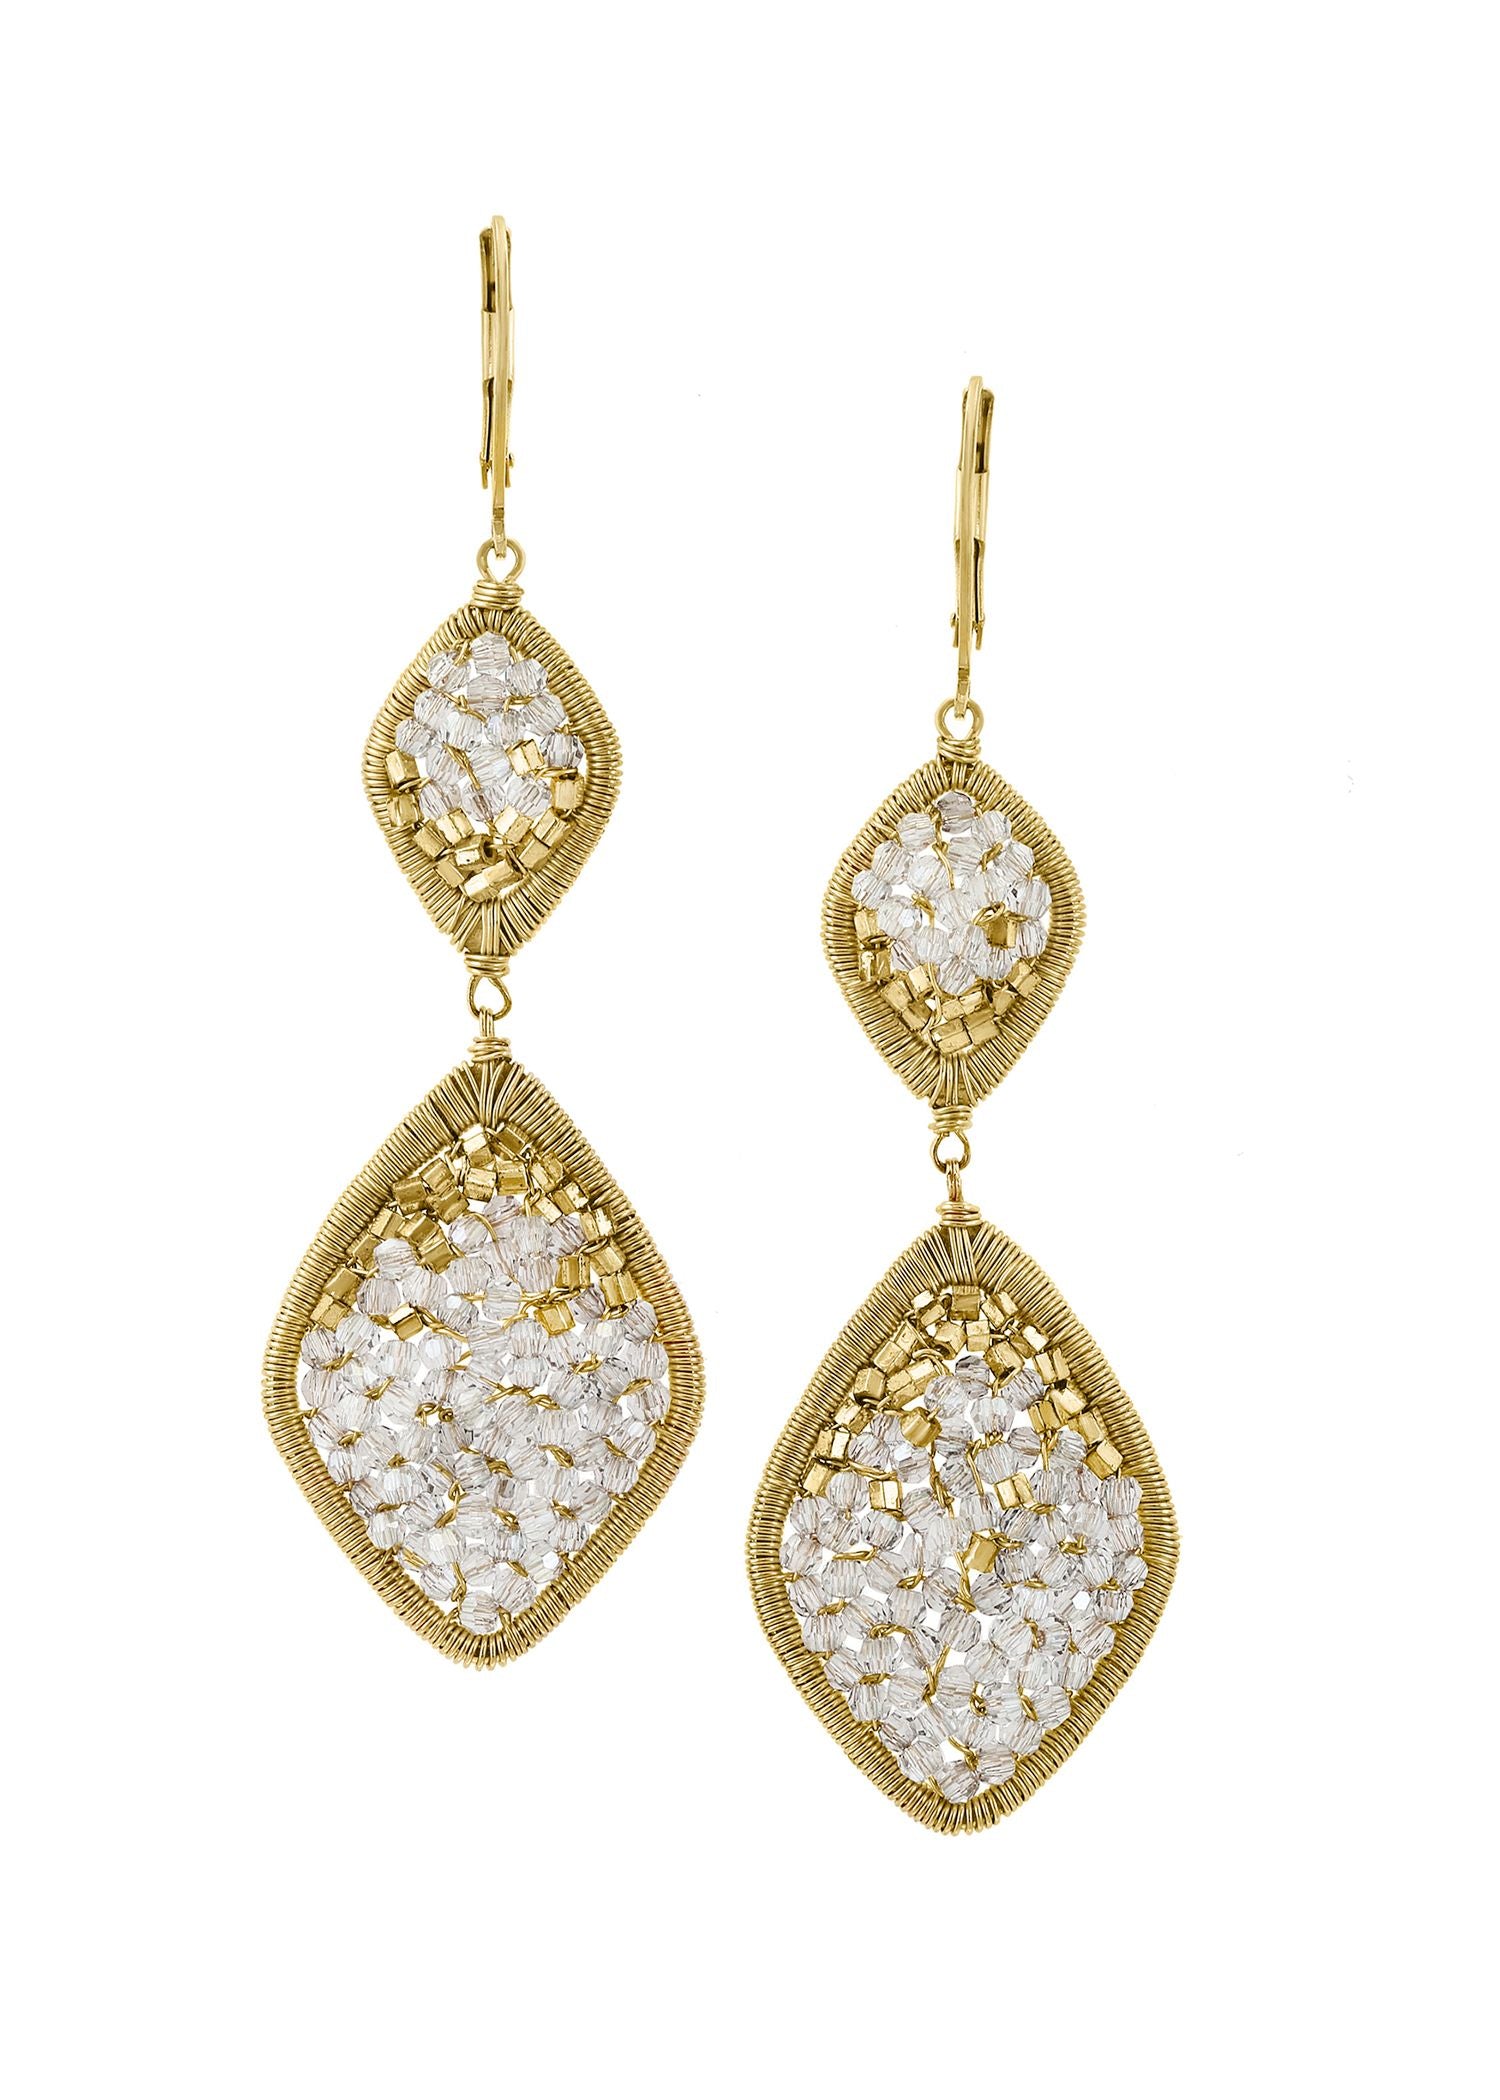 Crystal 14k gold fill Earrings measure 2-1/2" in length (including the levers) and 3/4" in width Handmade in our Los Angeles studio